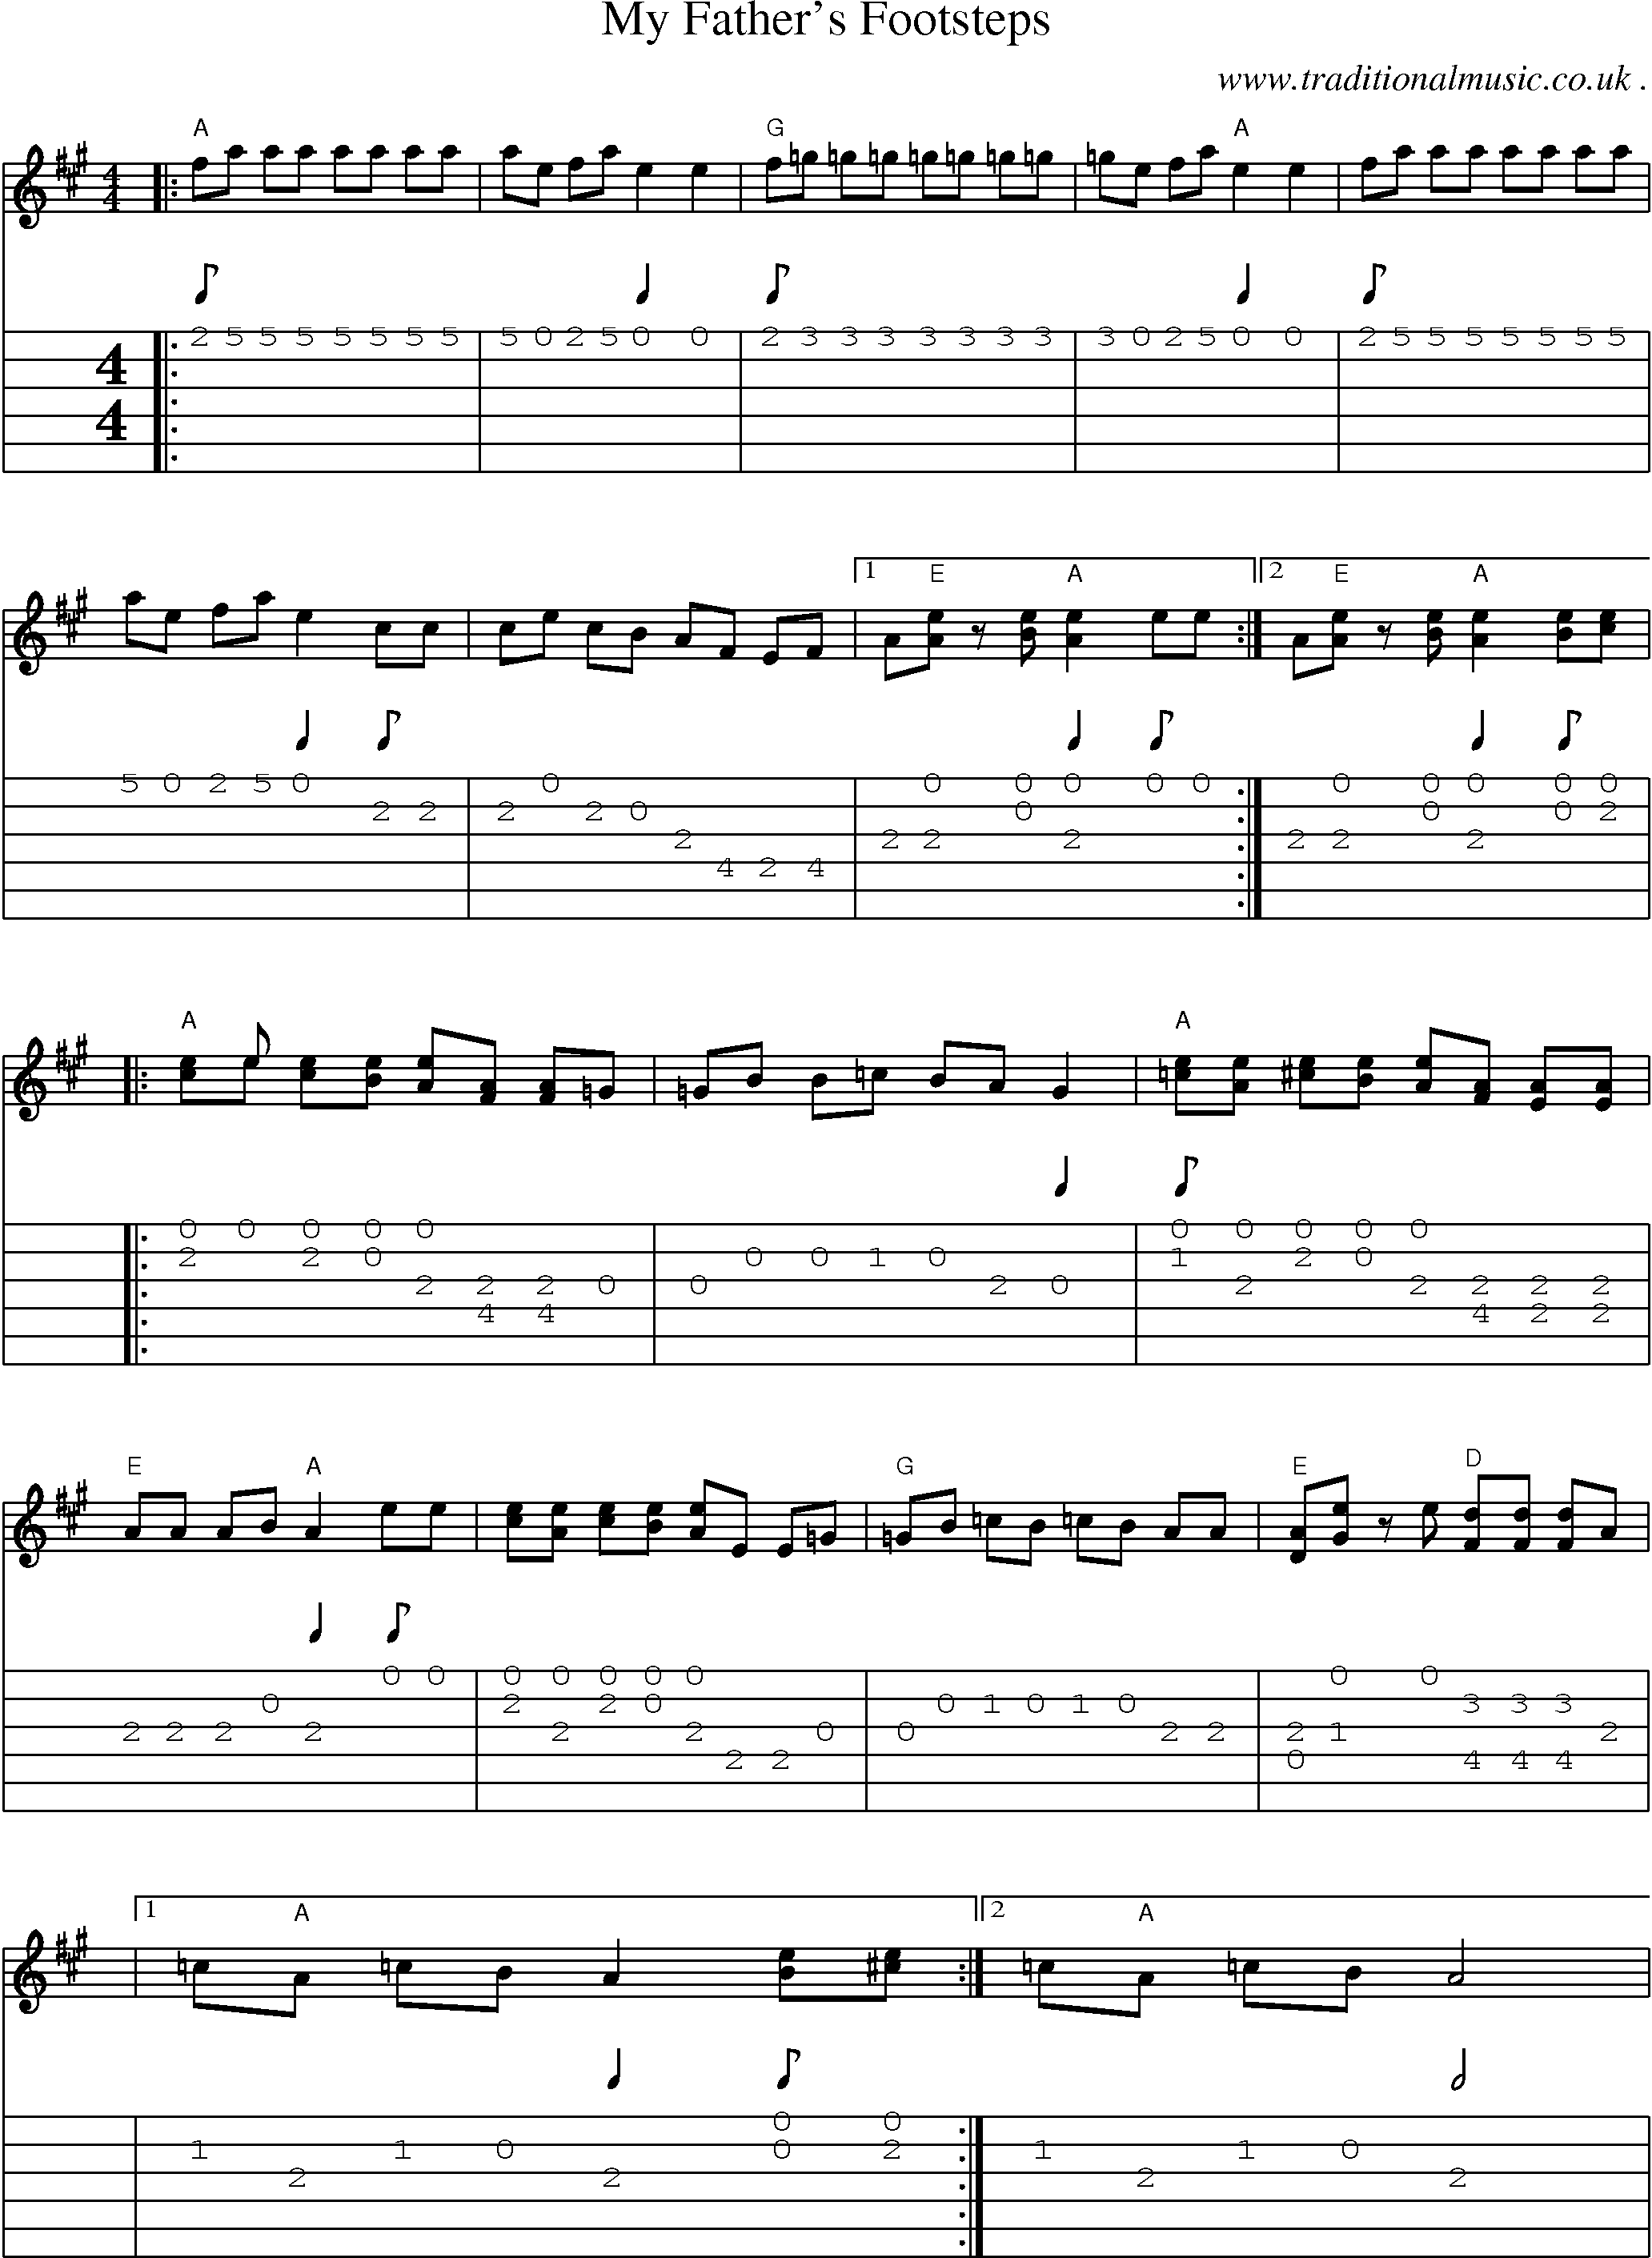 Music Score and Guitar Tabs for My Fathers Footsteps